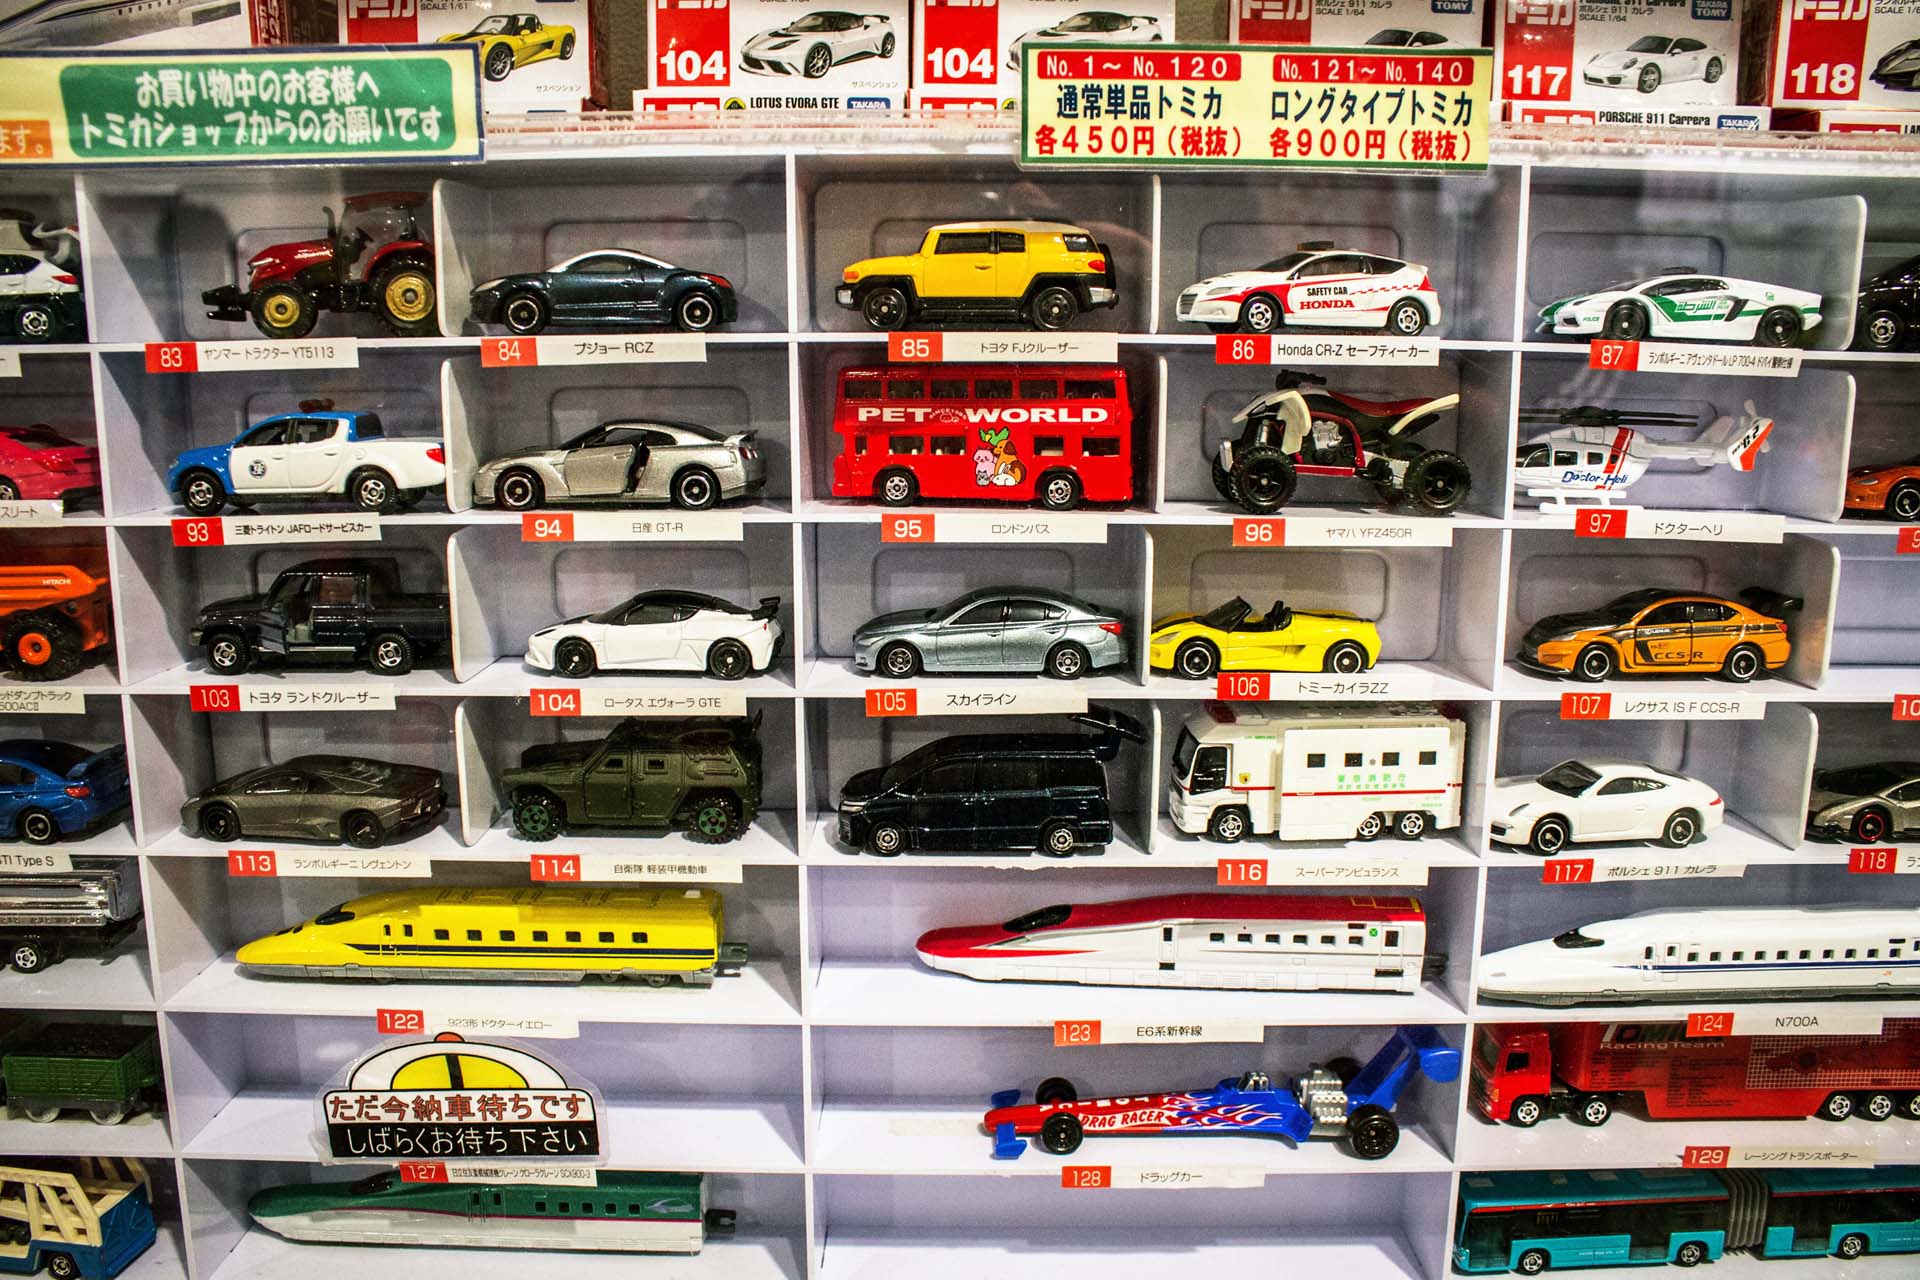 This is the standard lineup of Tomica cars. Pretty much every one of them has an opening door or hood or other function for a kid to play with. The longer versions feature bullet trains or transporter trucks and buses.